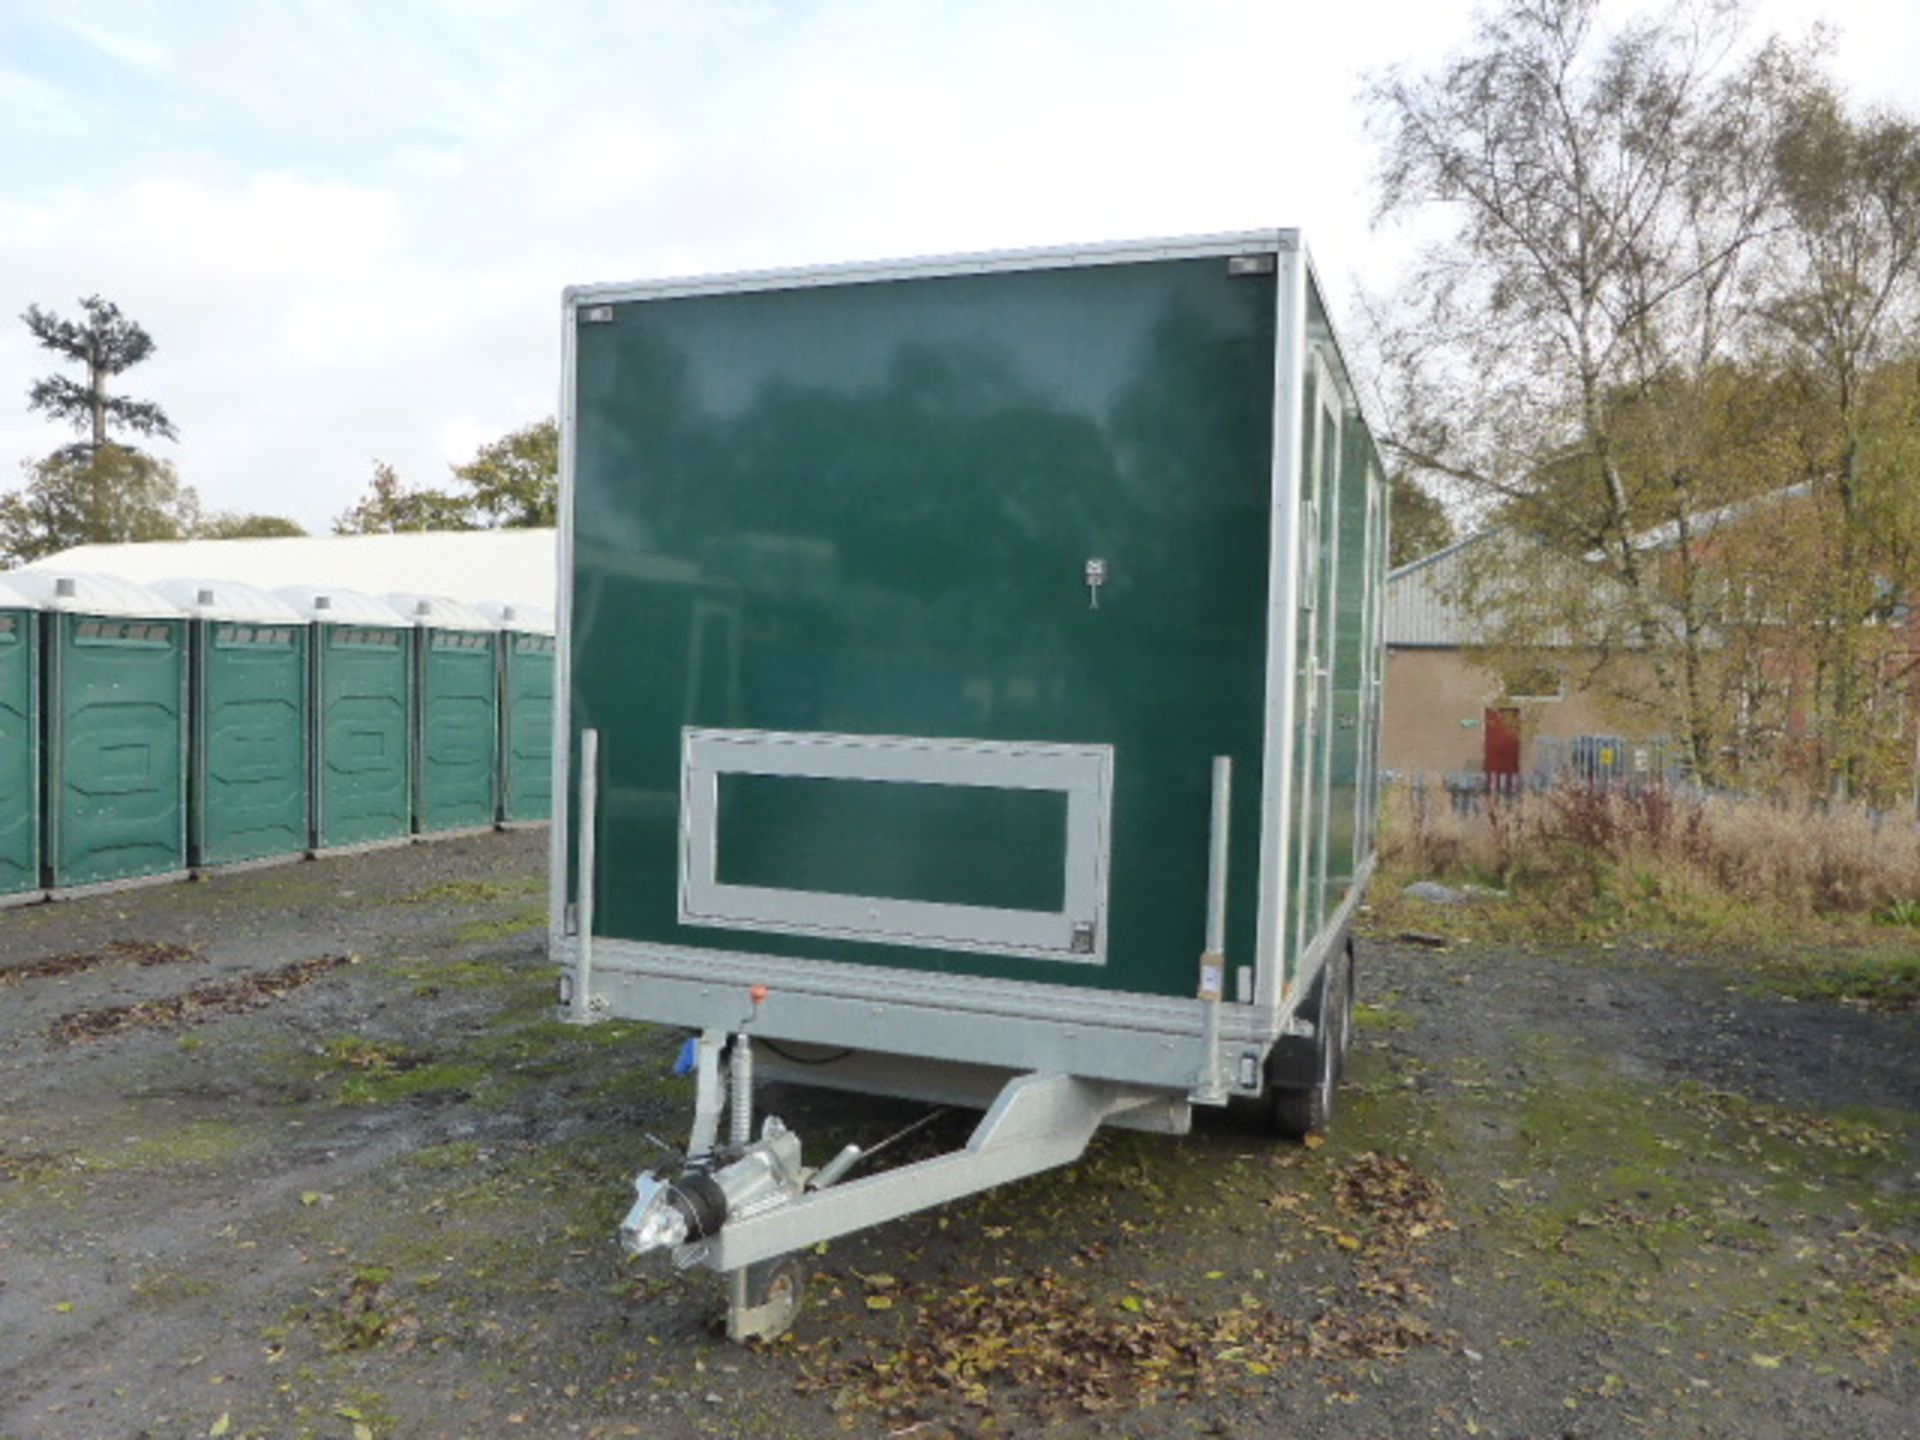 Wiltshire  luxury 2 +1 toilet trailer by Premier Mobile twin axle with recirculation unit -Year - Image 20 of 26